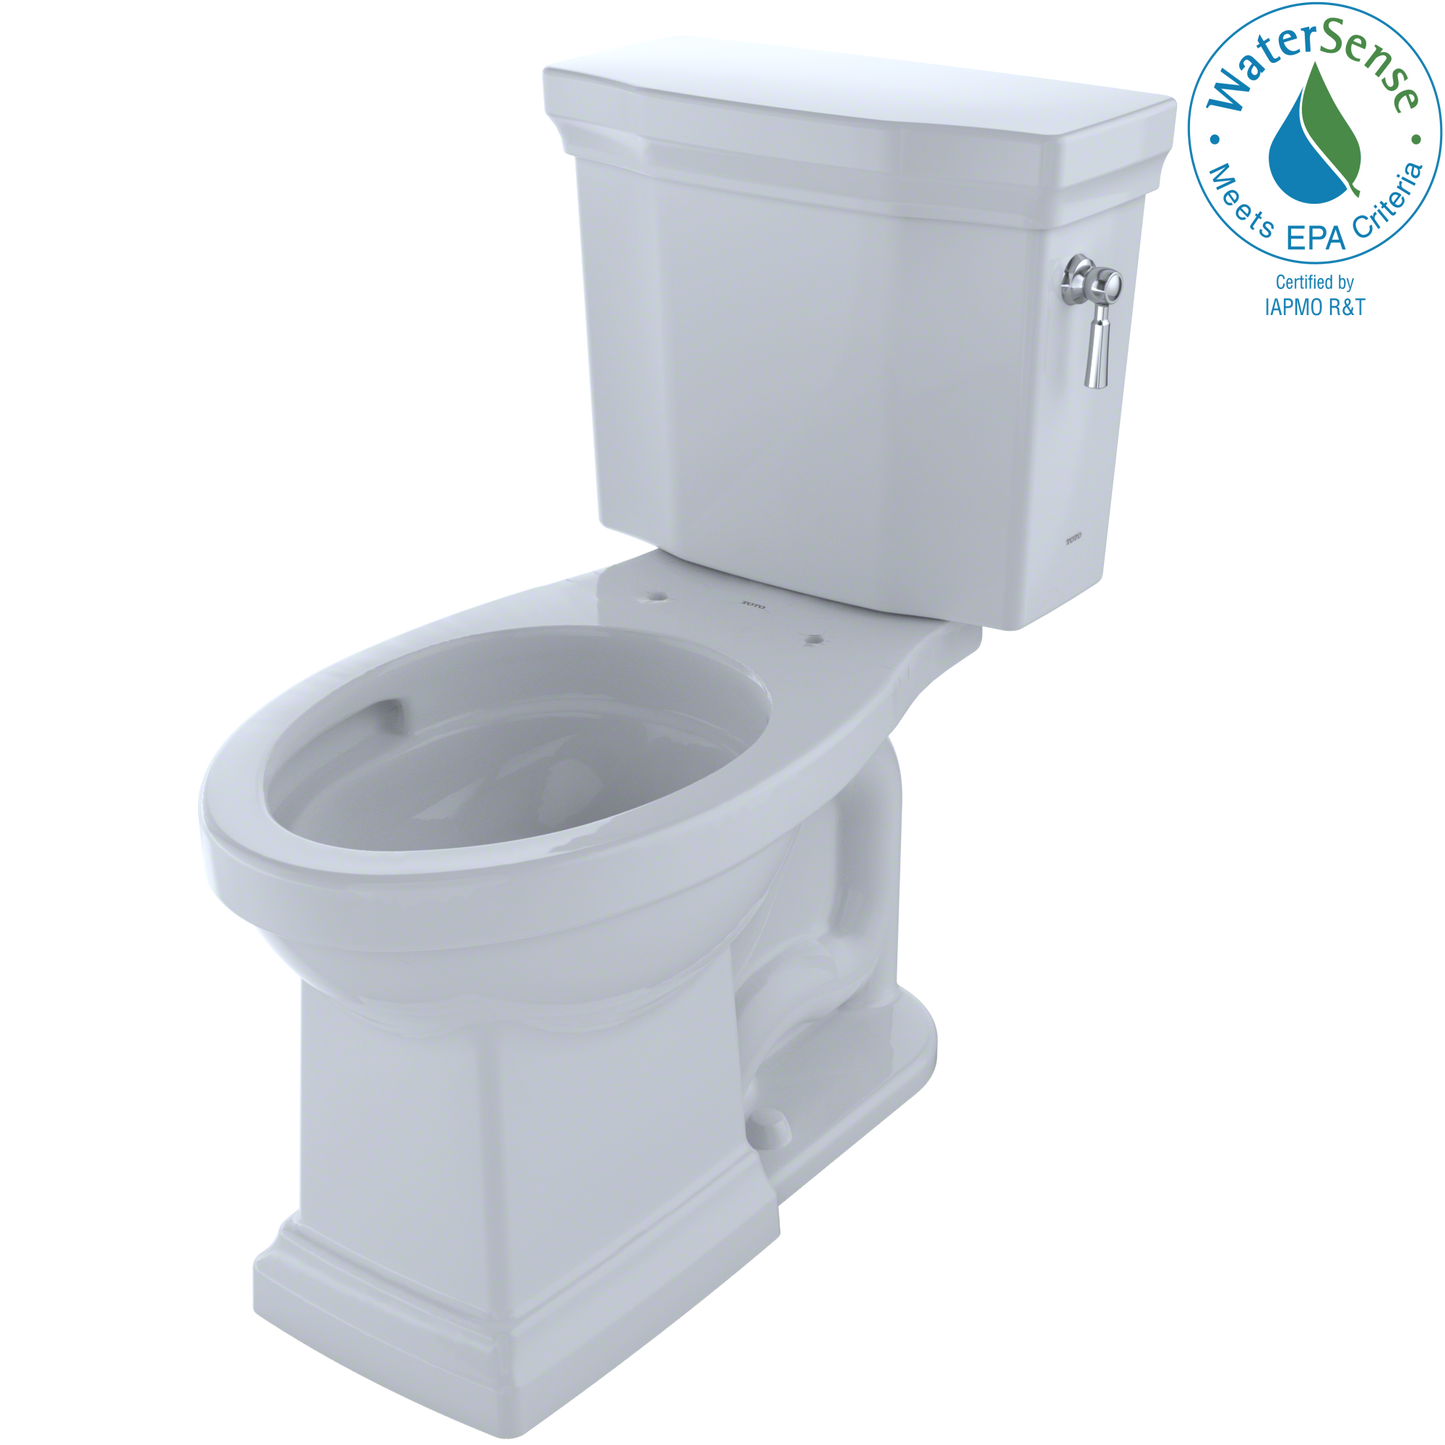 TOTO® Promenade® II 1G® Two-Piece Elongated 1.0 GPF Universal Height Toilet with CEFIONTECT and Right-Hand Trip Lever, Cotton White - CST404CUFRG#01